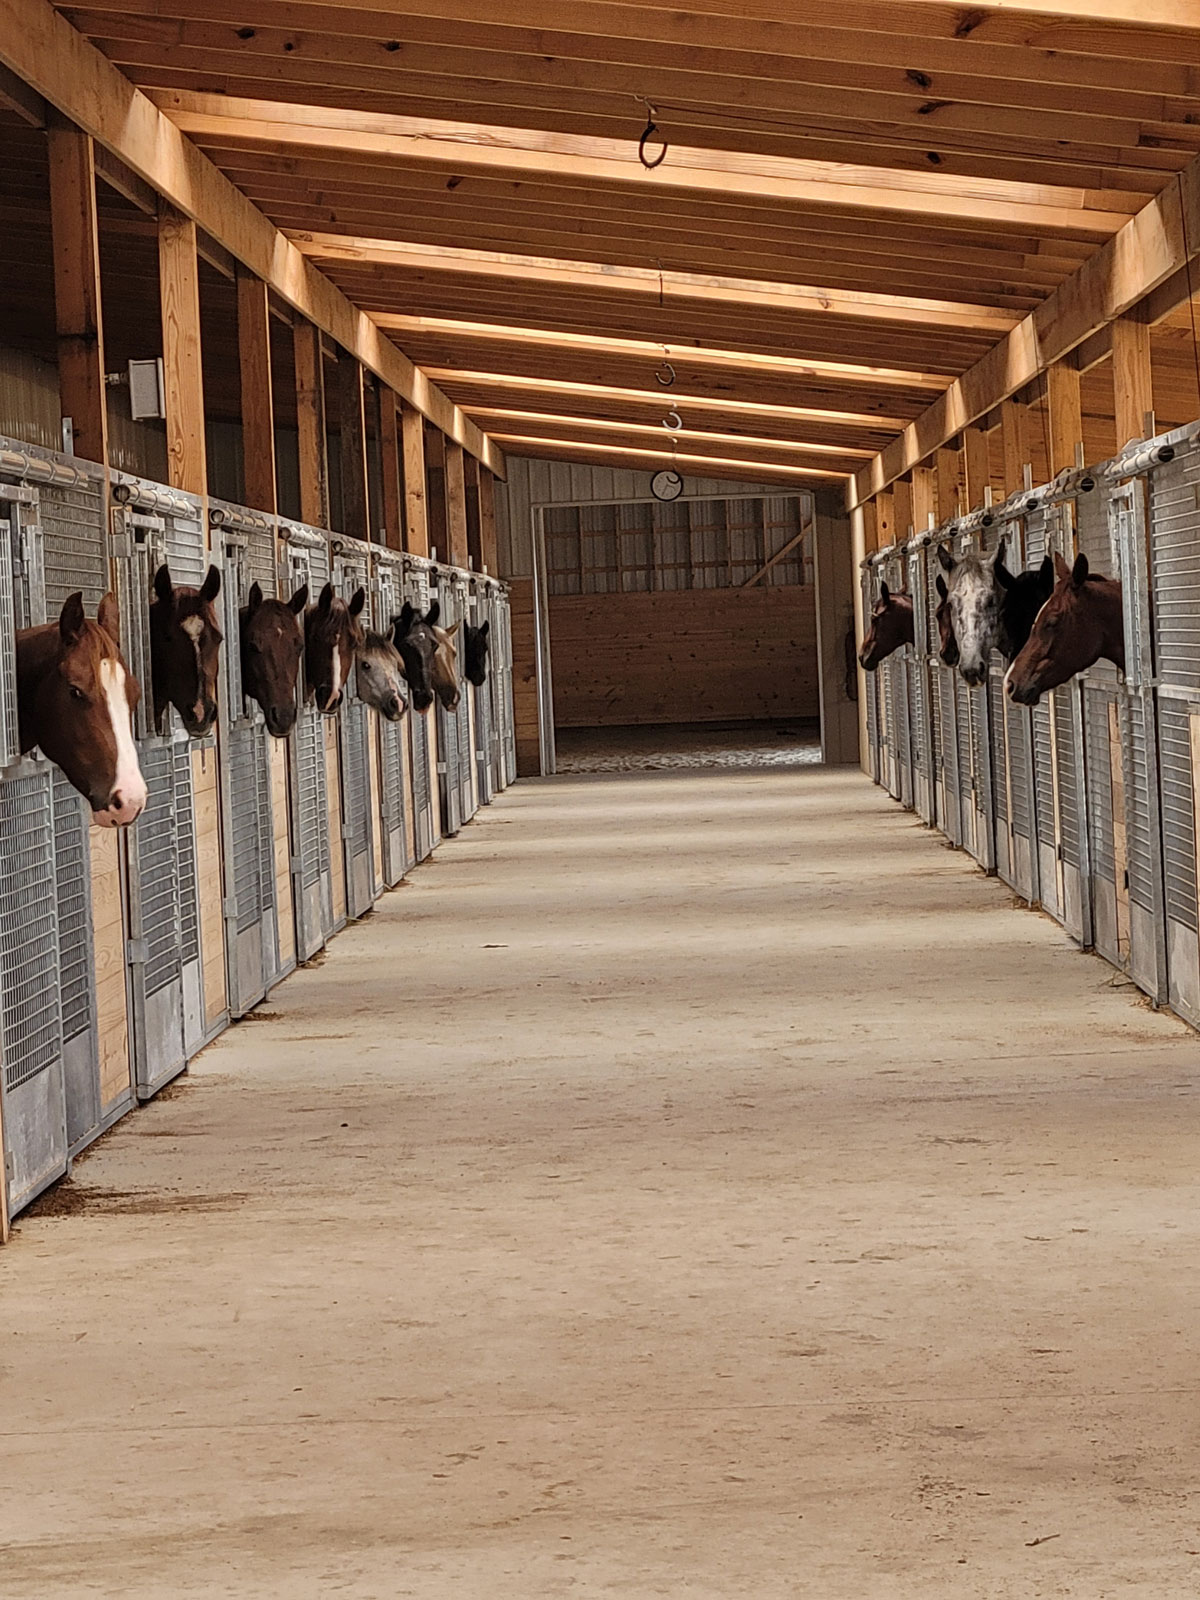 Corridor lined with horses sticking their heads out of custom made mesh stalls